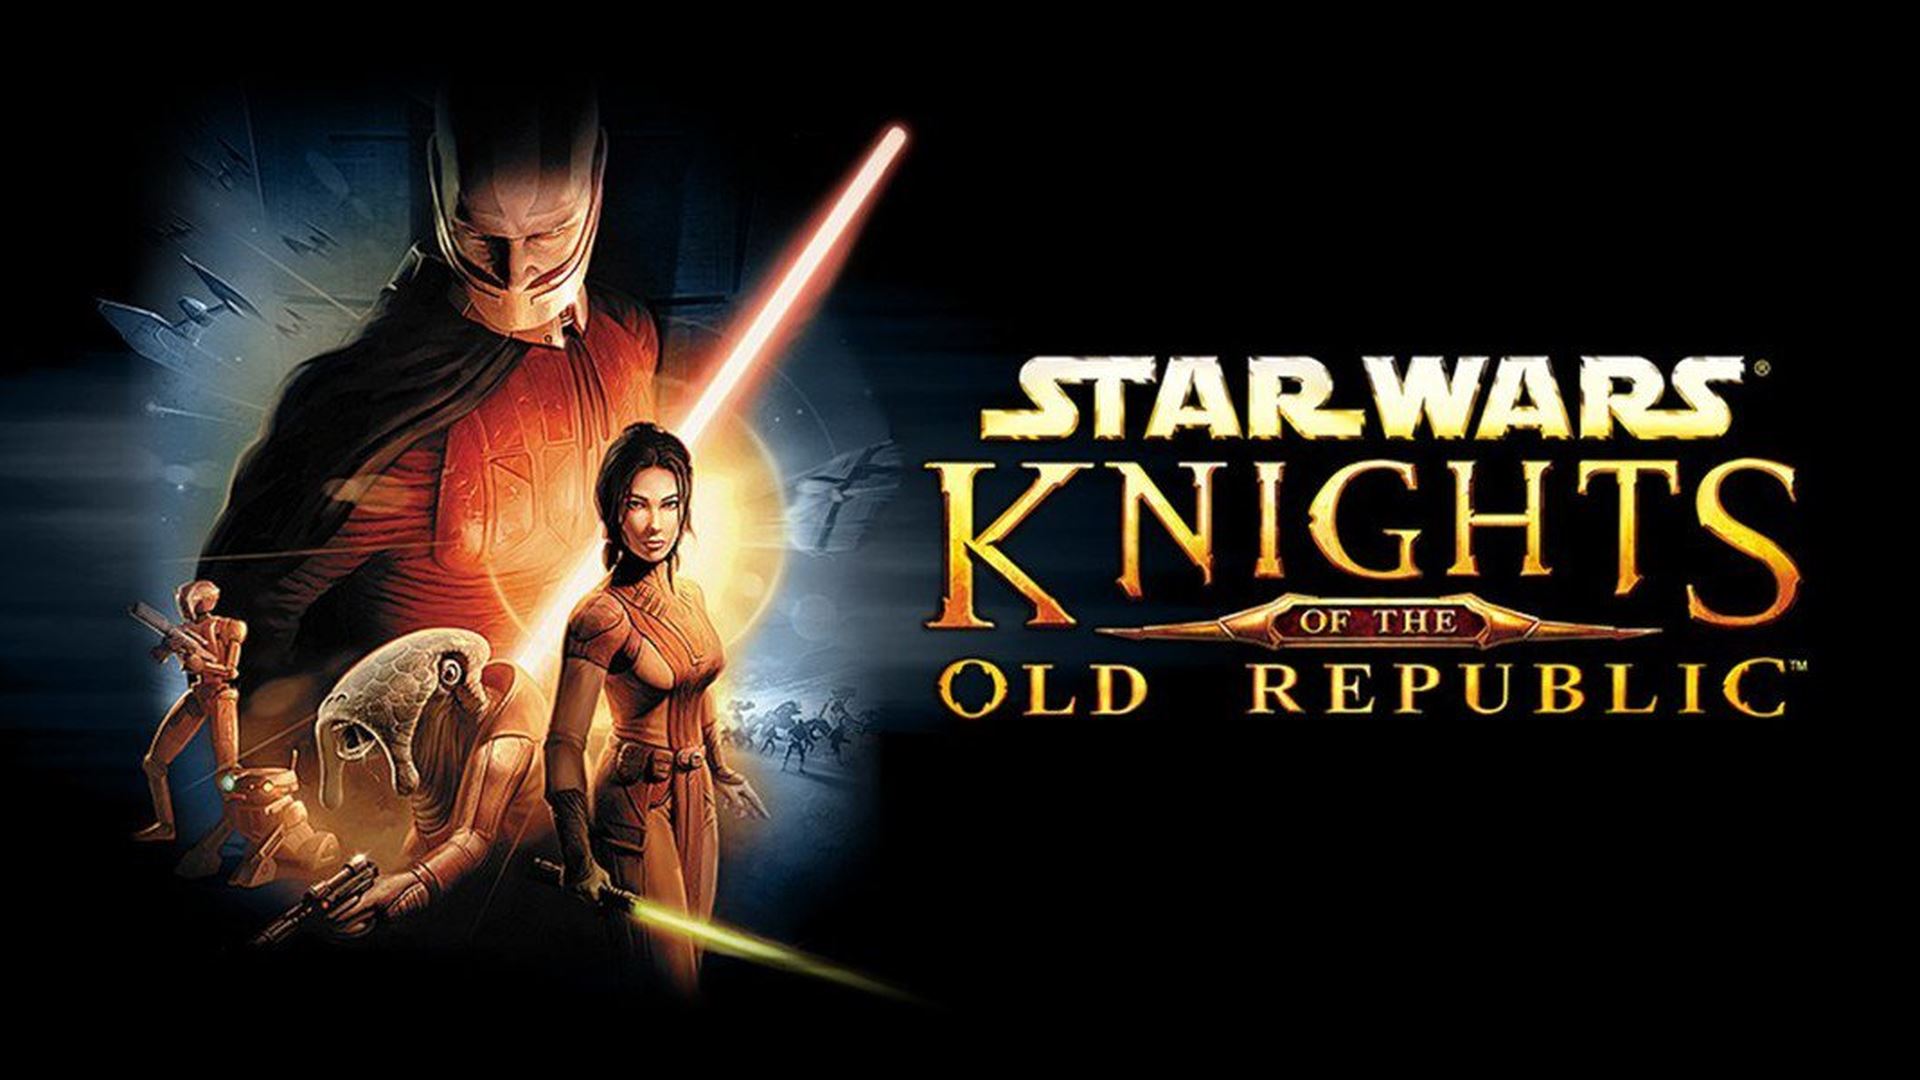 Star Wars: Knights of the Old Republic – Remake; Star Wars